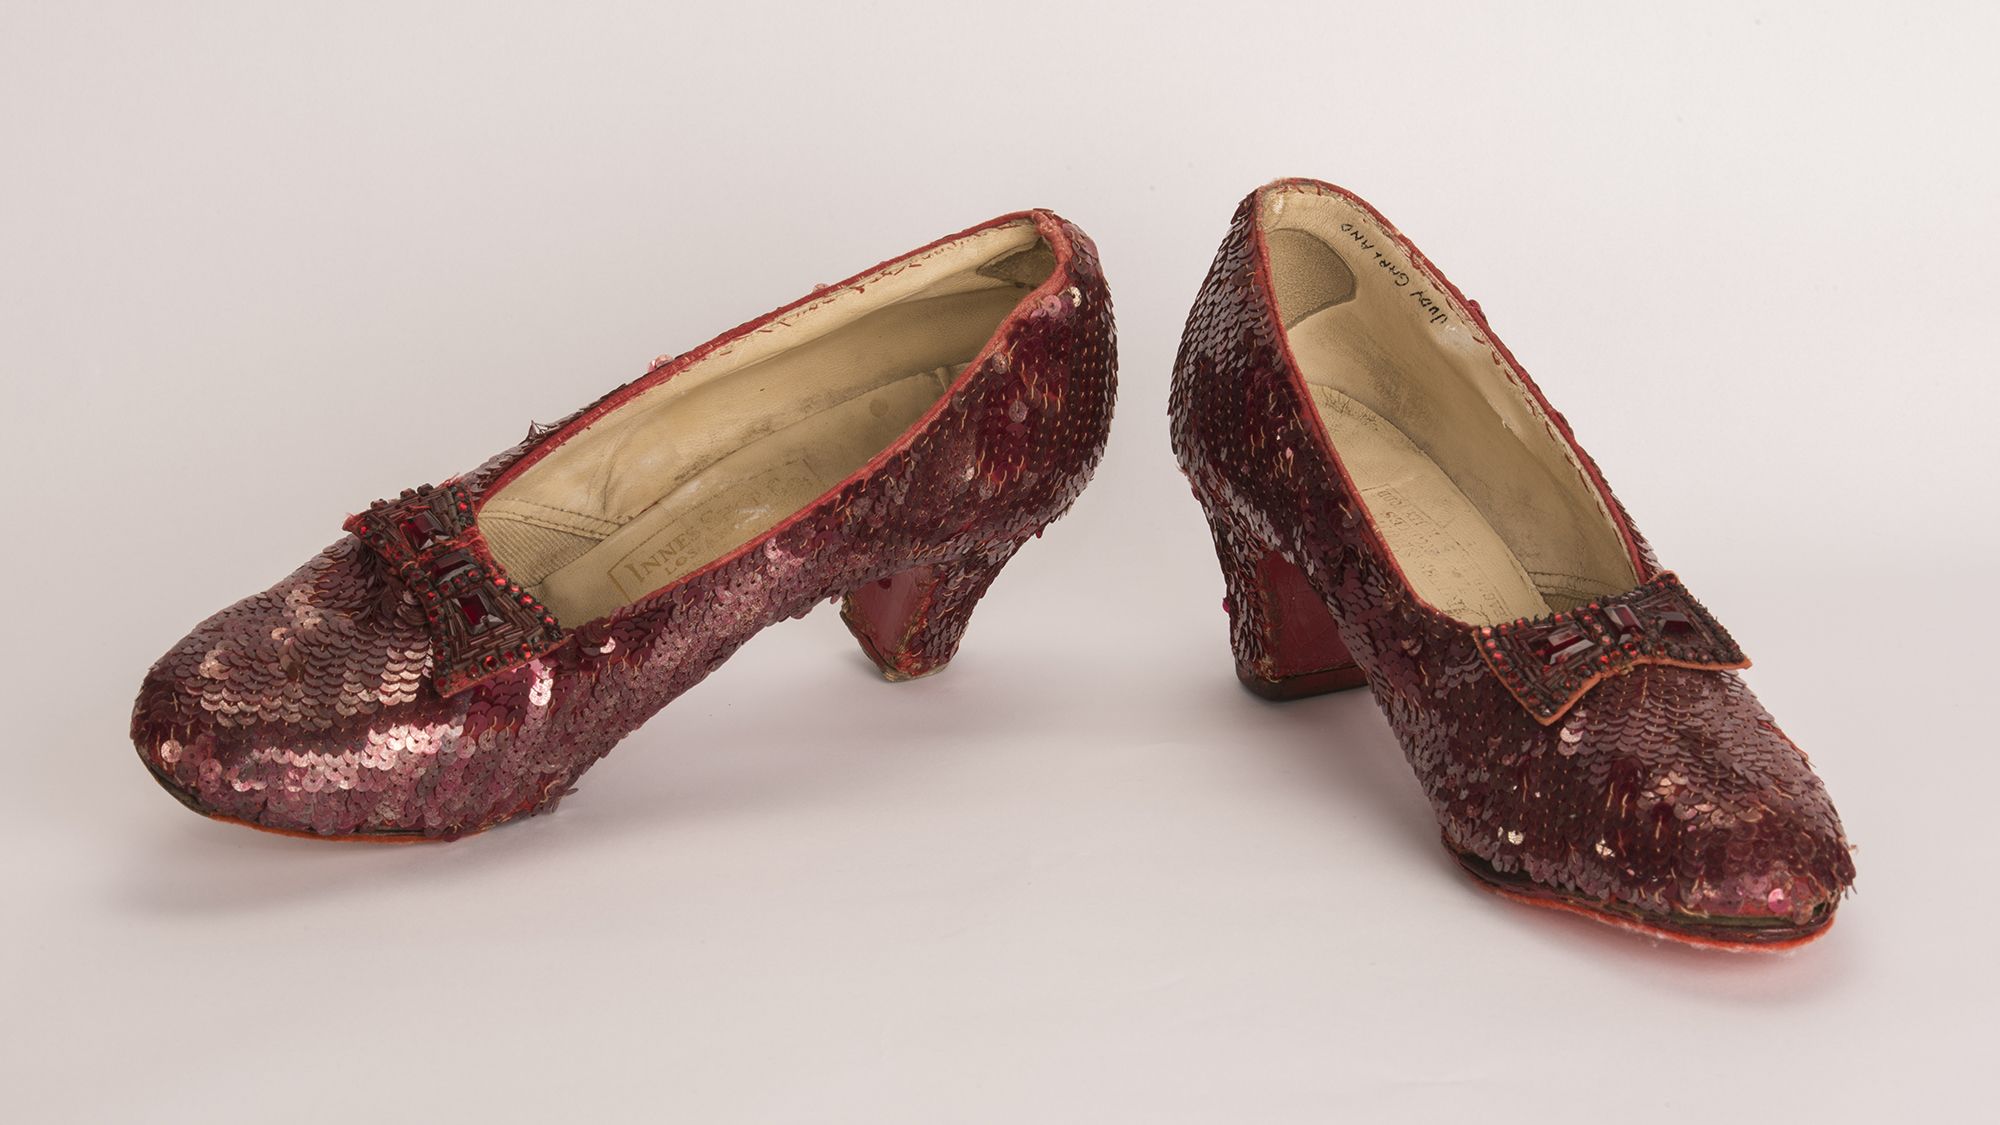 Thief Of ‘Wizard Of Oz’ Ruby Slippers Comes Clean And Plans Guilty Plea